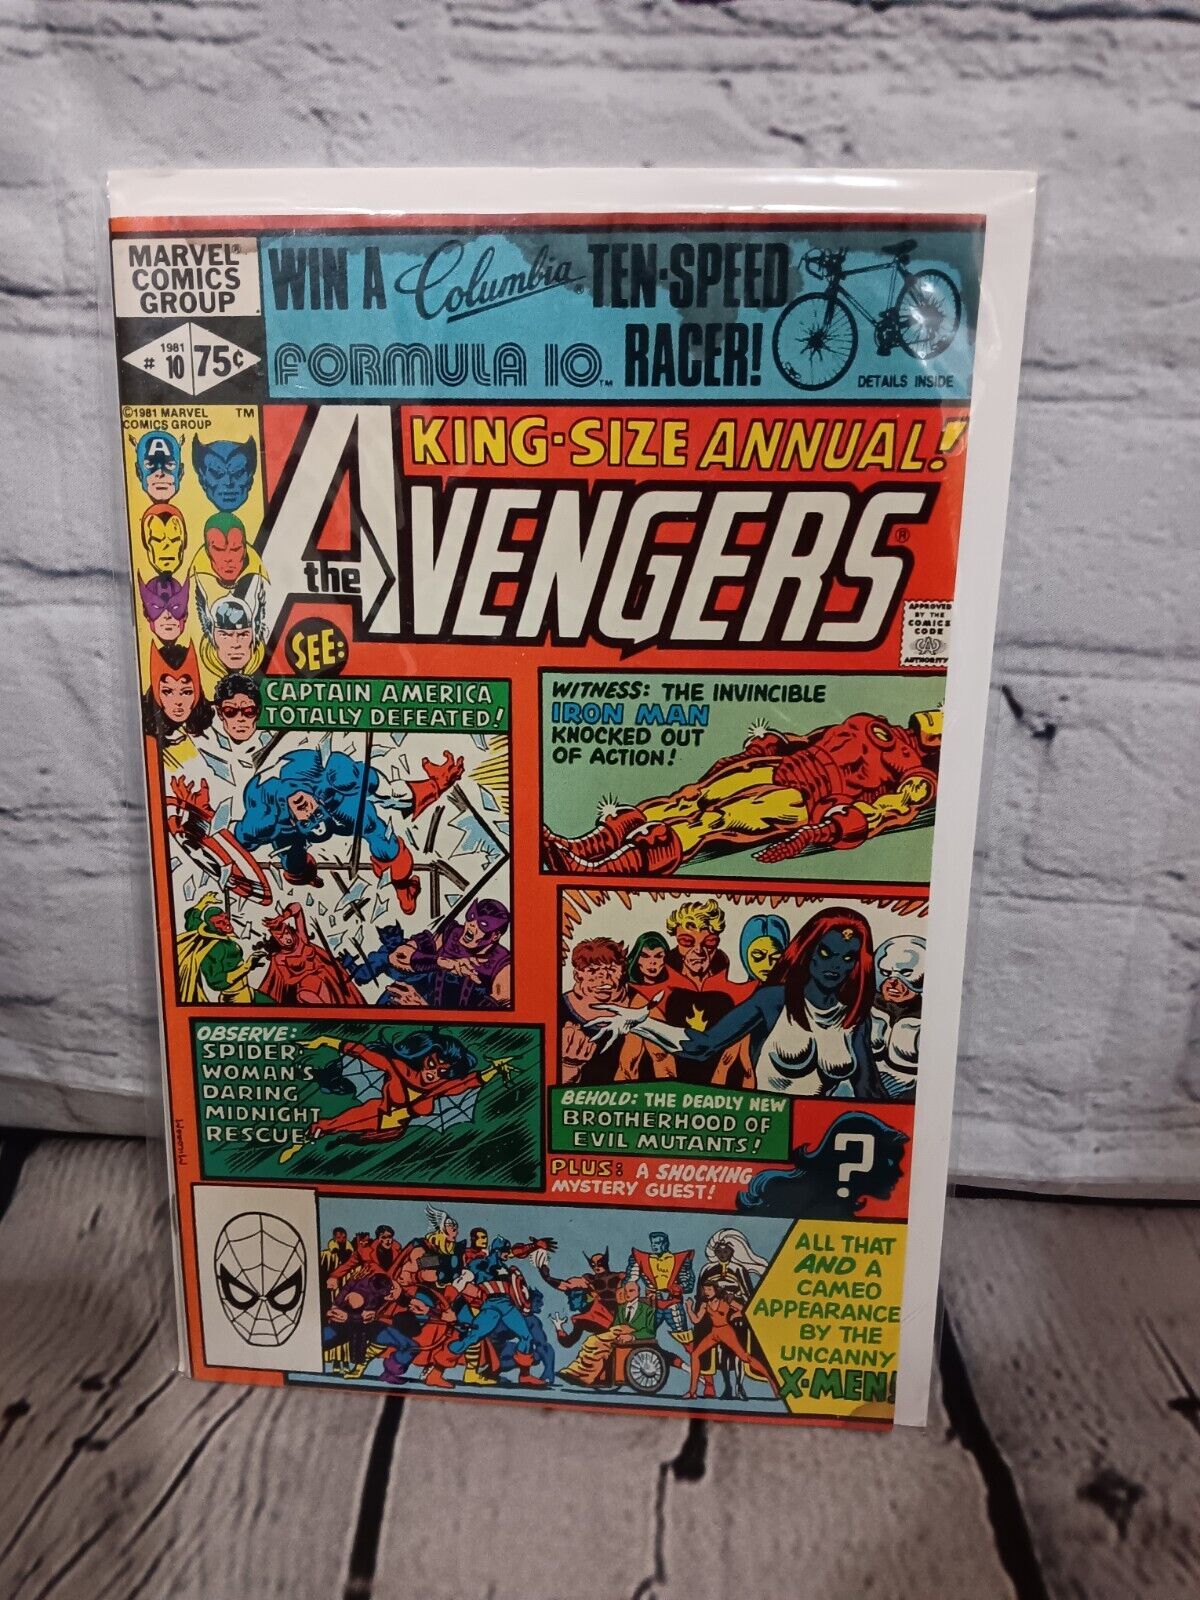 The Avengers - King Size Annual, Comic Book